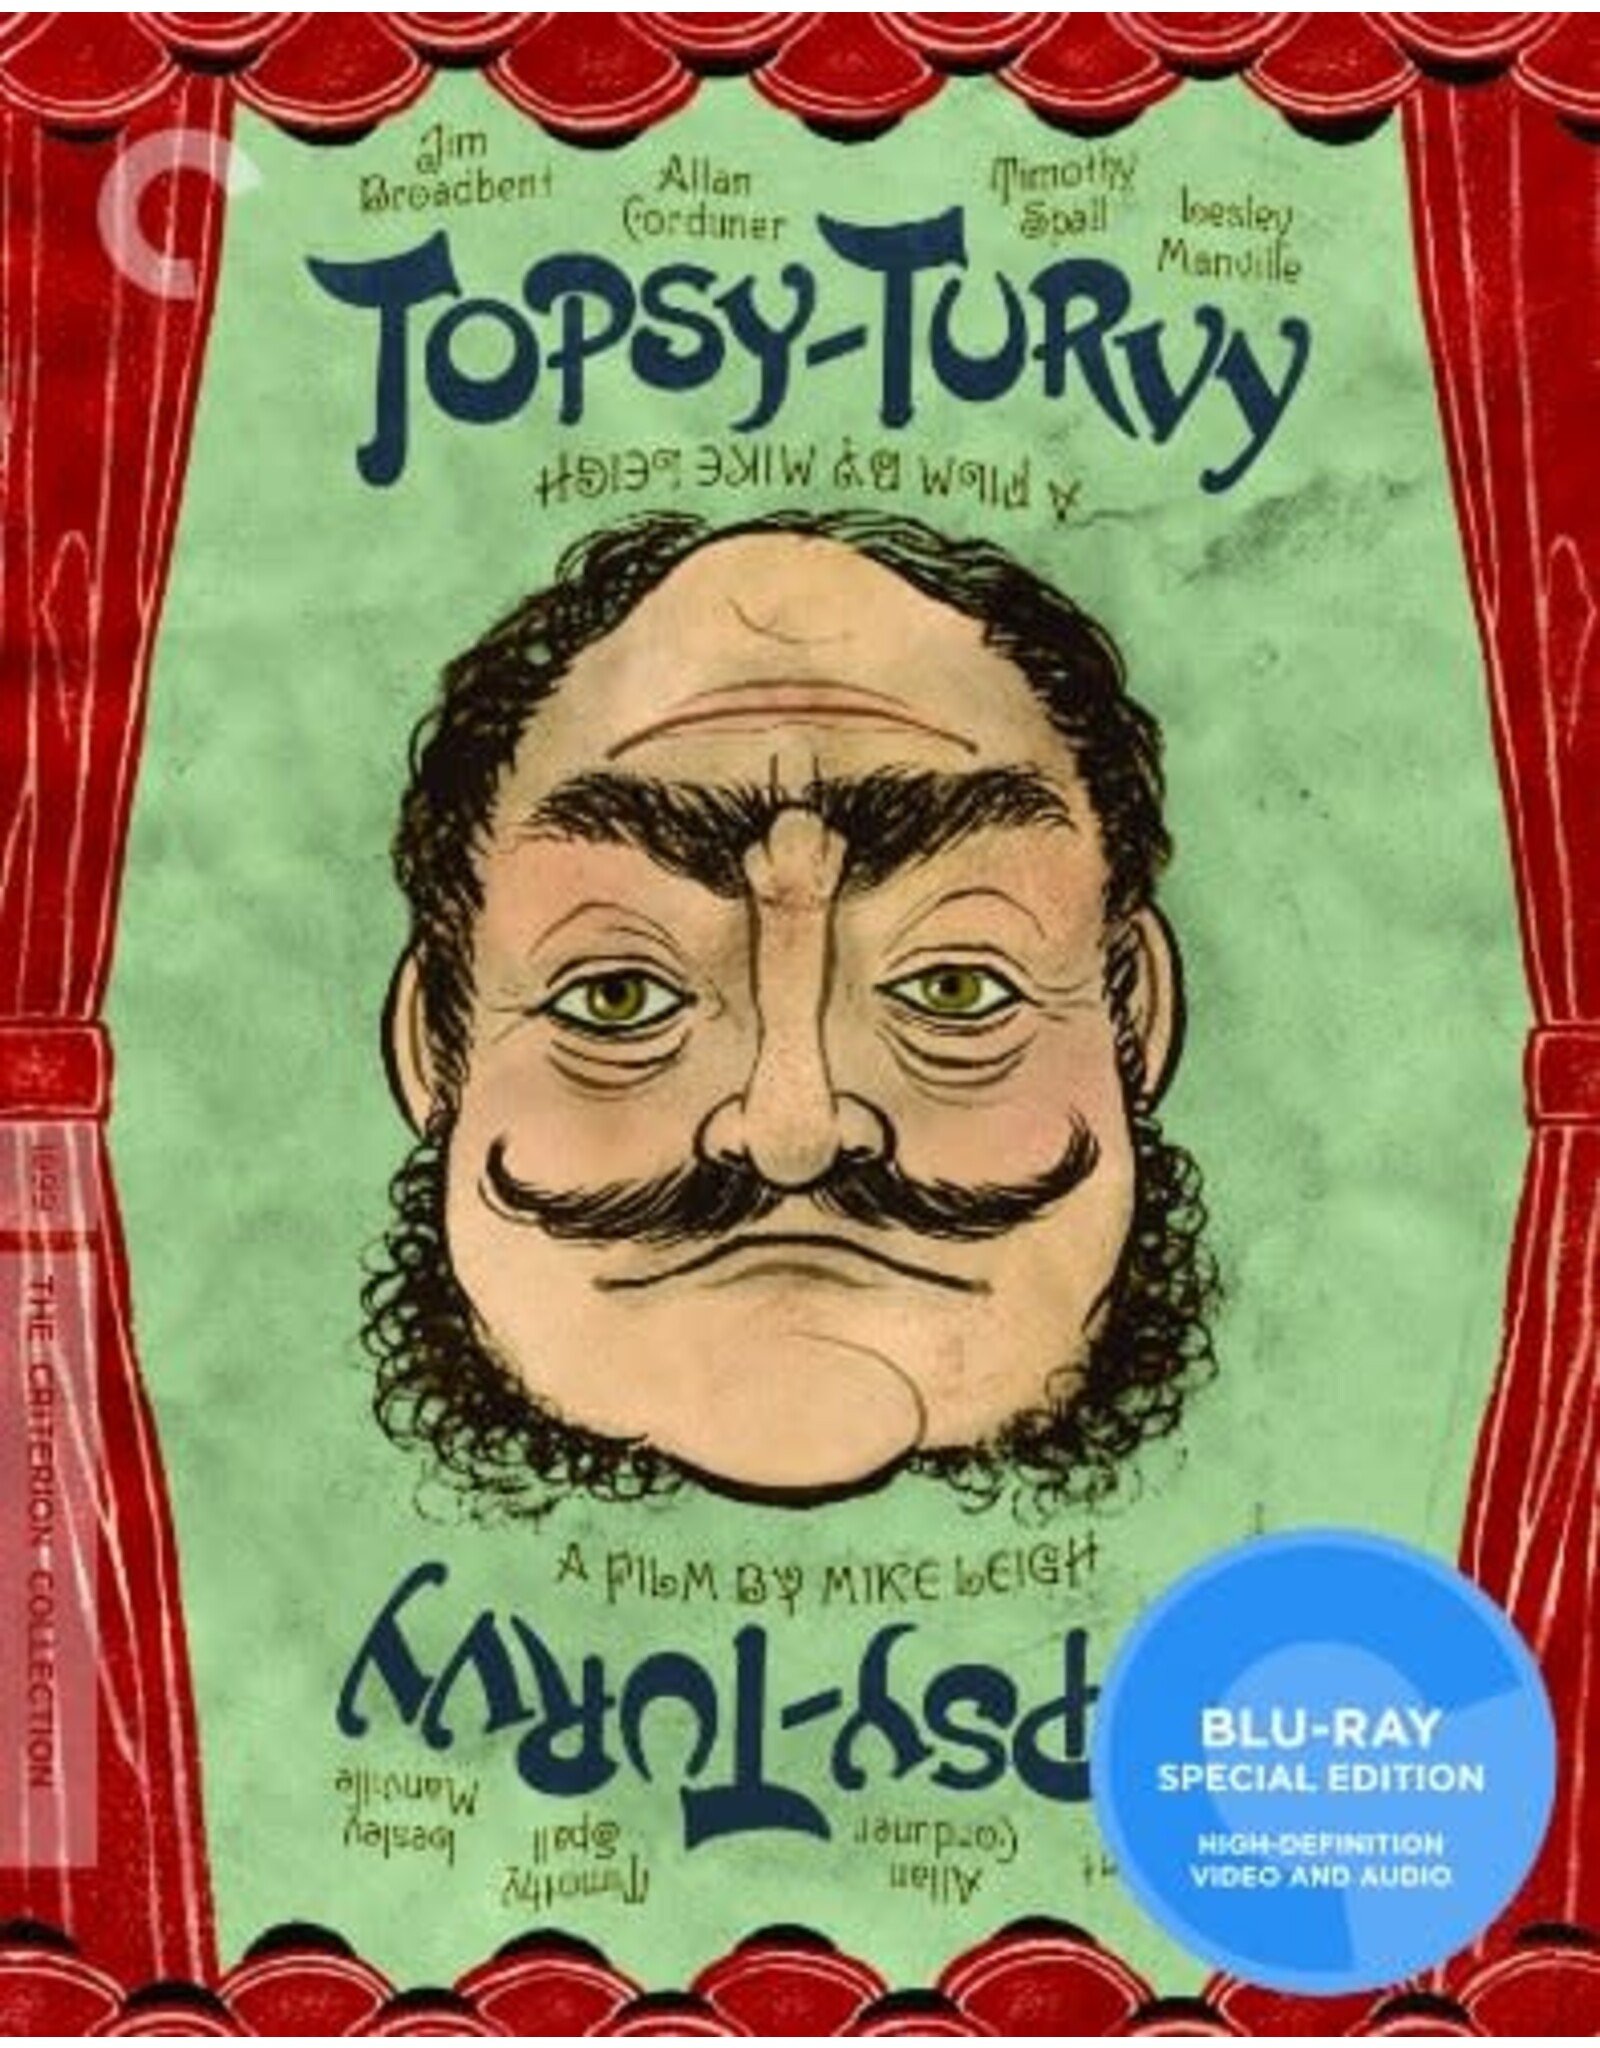 Criterion Collection Topsy-Turvy - Criterion Collection (Brand New)